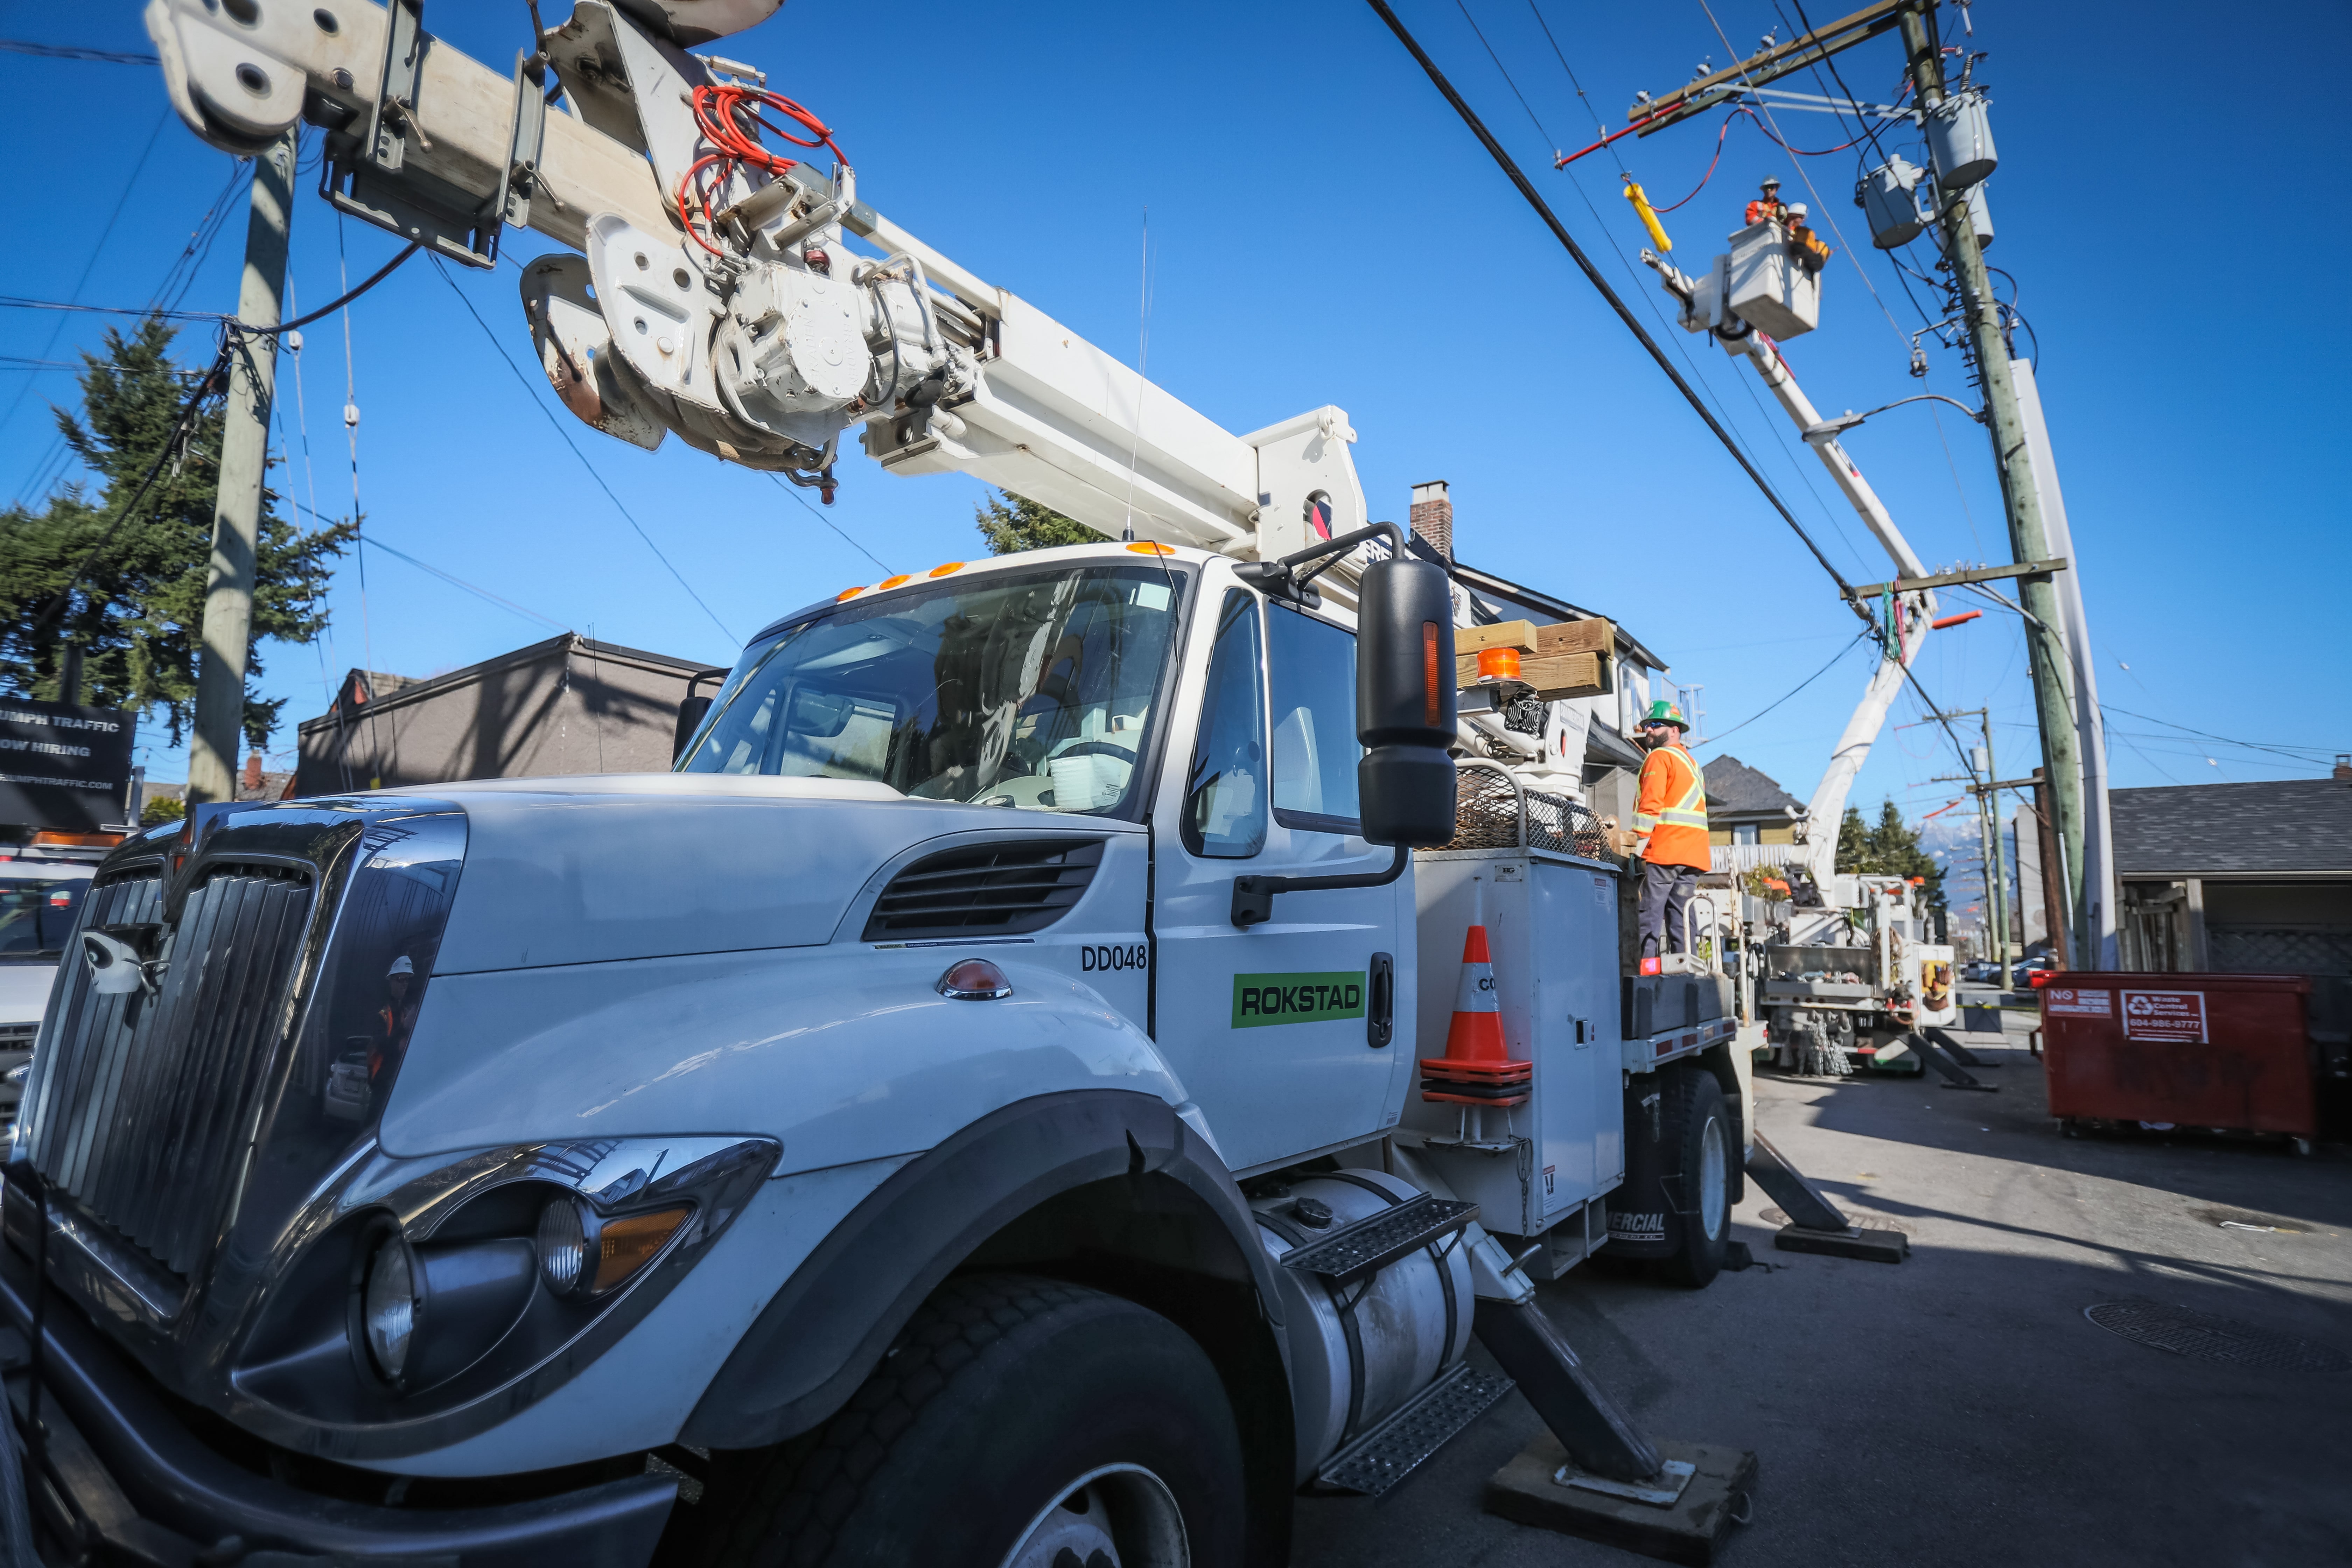 Ongoing Distribution Transmission And Trouble Line Services Bc Hydro Rokstad Power